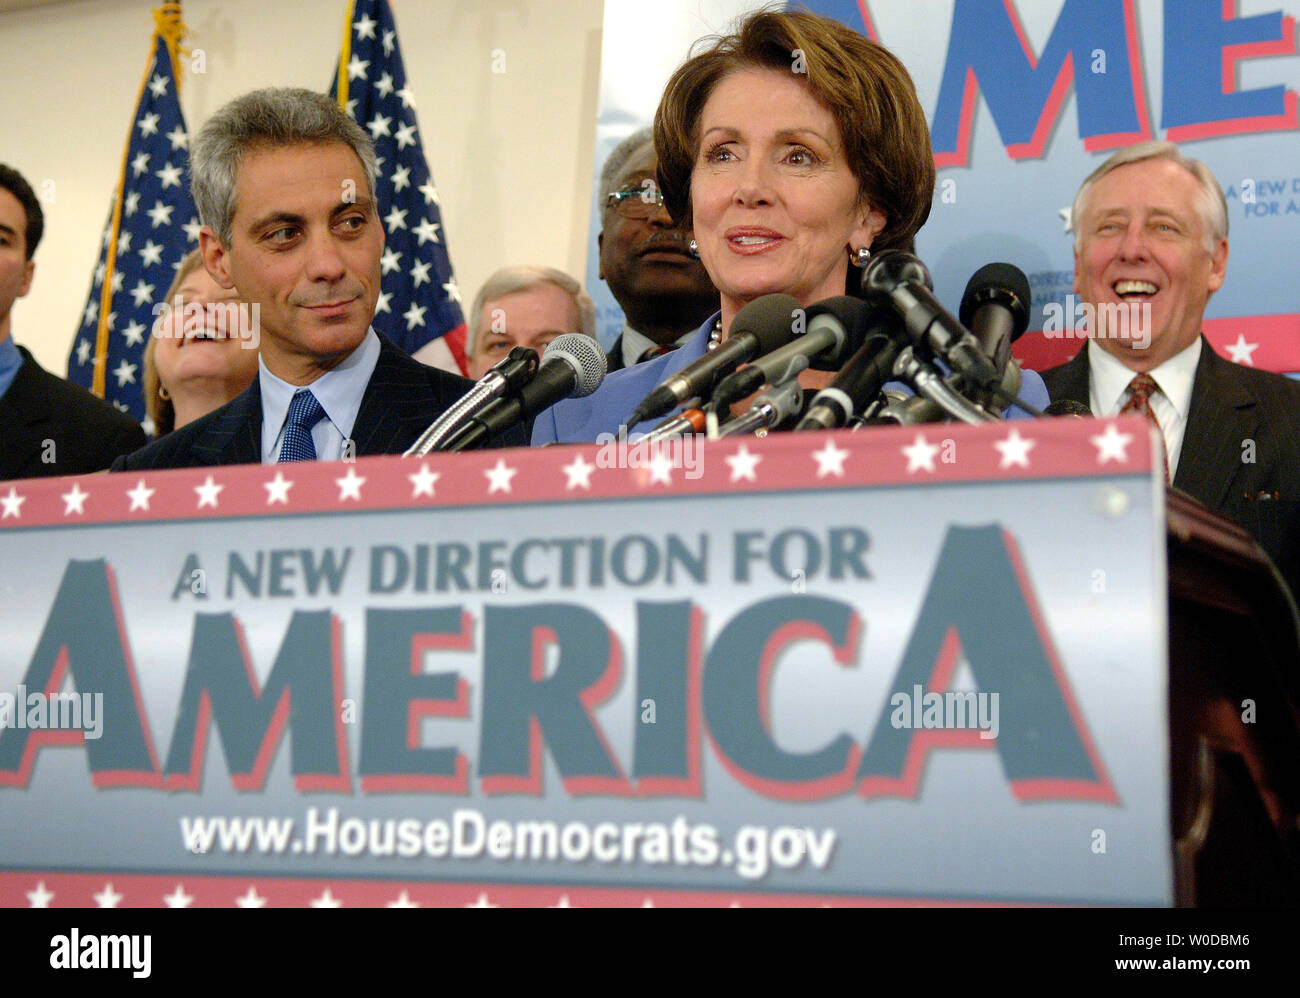 Speaker of the House Nancy Pelosi (D-CA) (C) speaks along side House Majority Leader Steny Hoyer (D-MD) (R) and Rep. Rahm Emanuel (D-IL) at a press conference marking the first 100 legislative hours of the new Congress, in Washington on January 18, 2007. (UPI Photo/Kevin Dietsch) Stock Photo